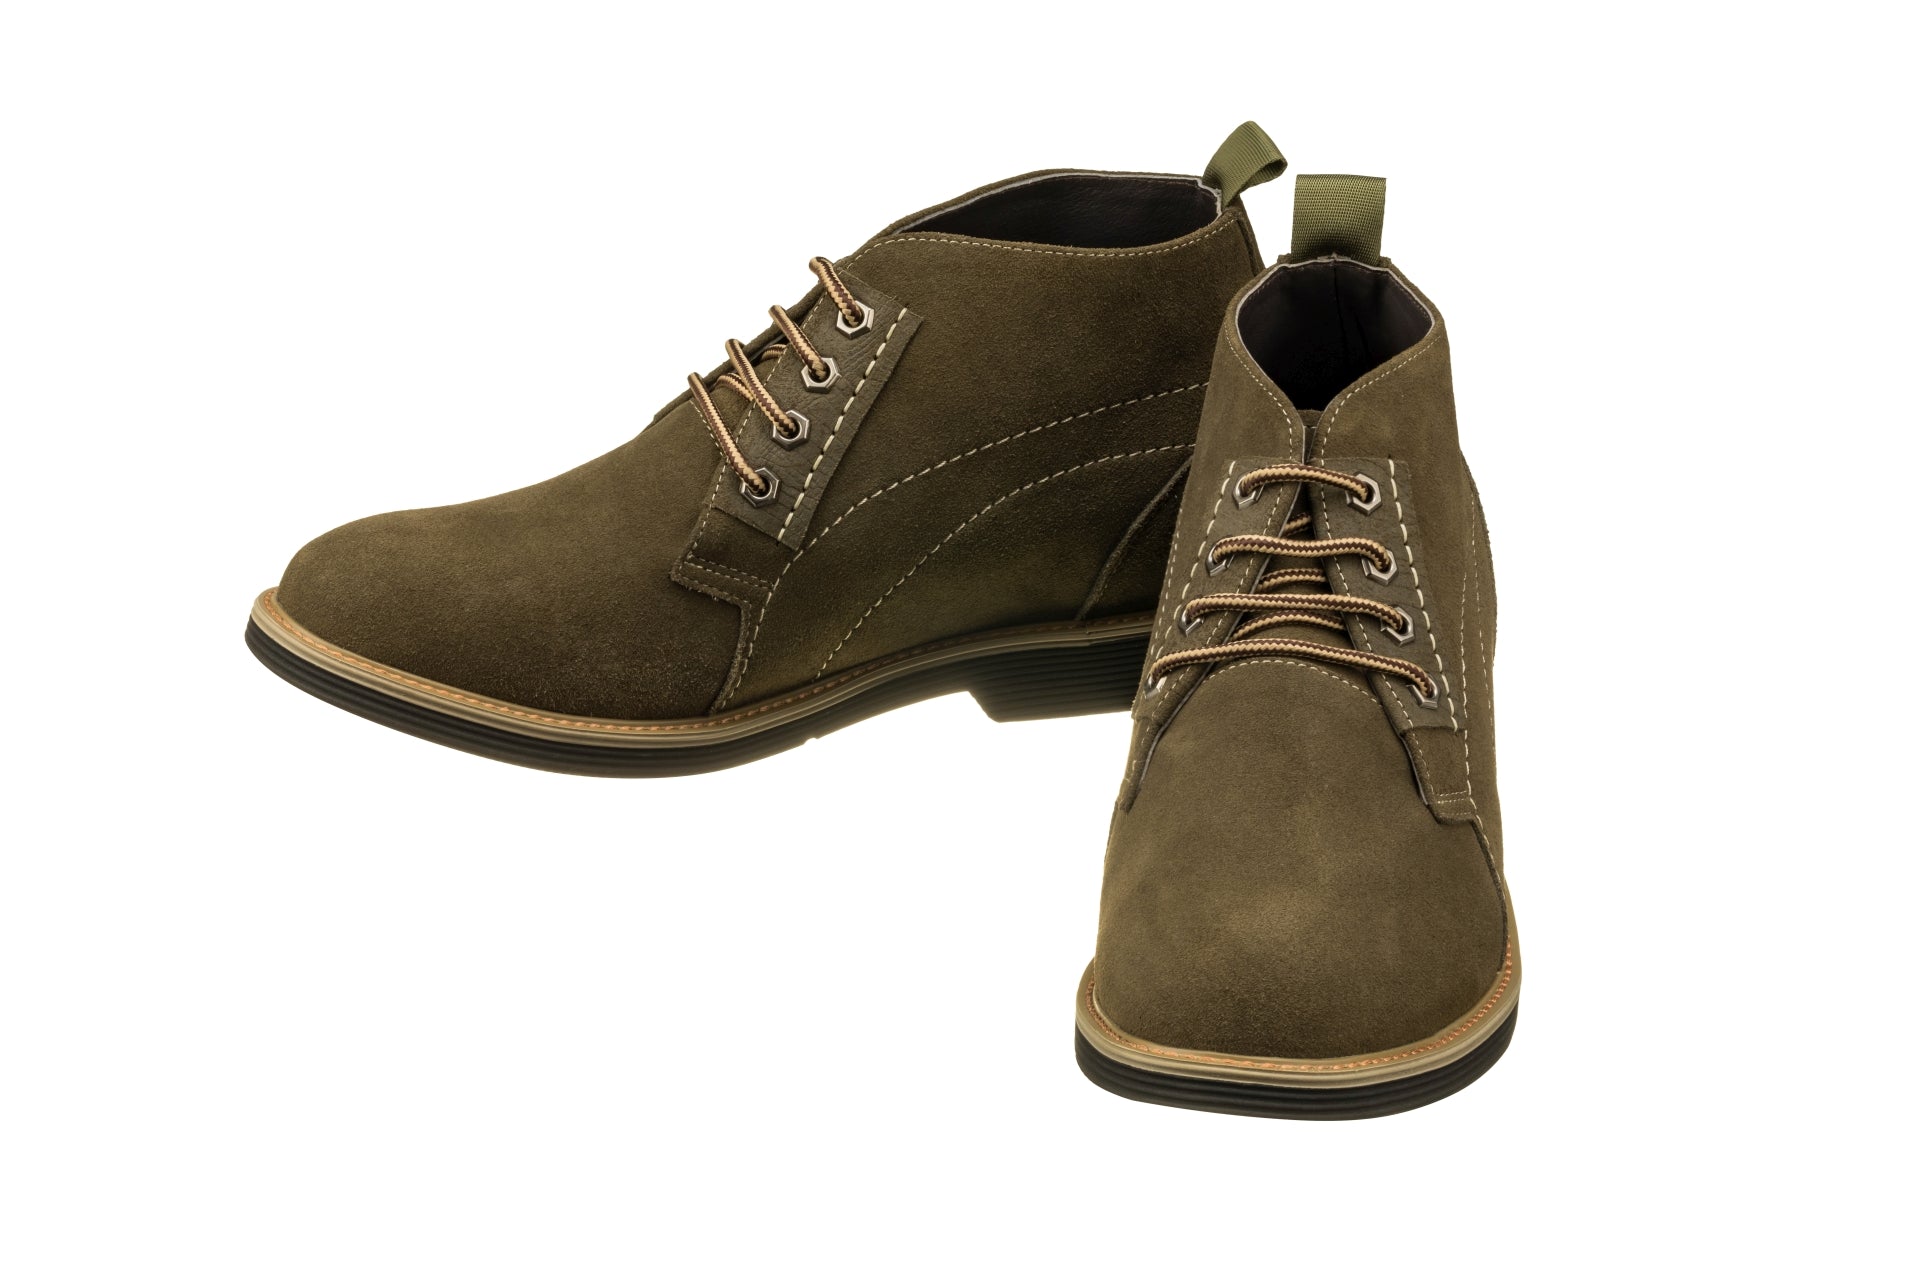 Elevator shoes height increase CALTO - K9912 - 3.2 Inches Taller (Olive)